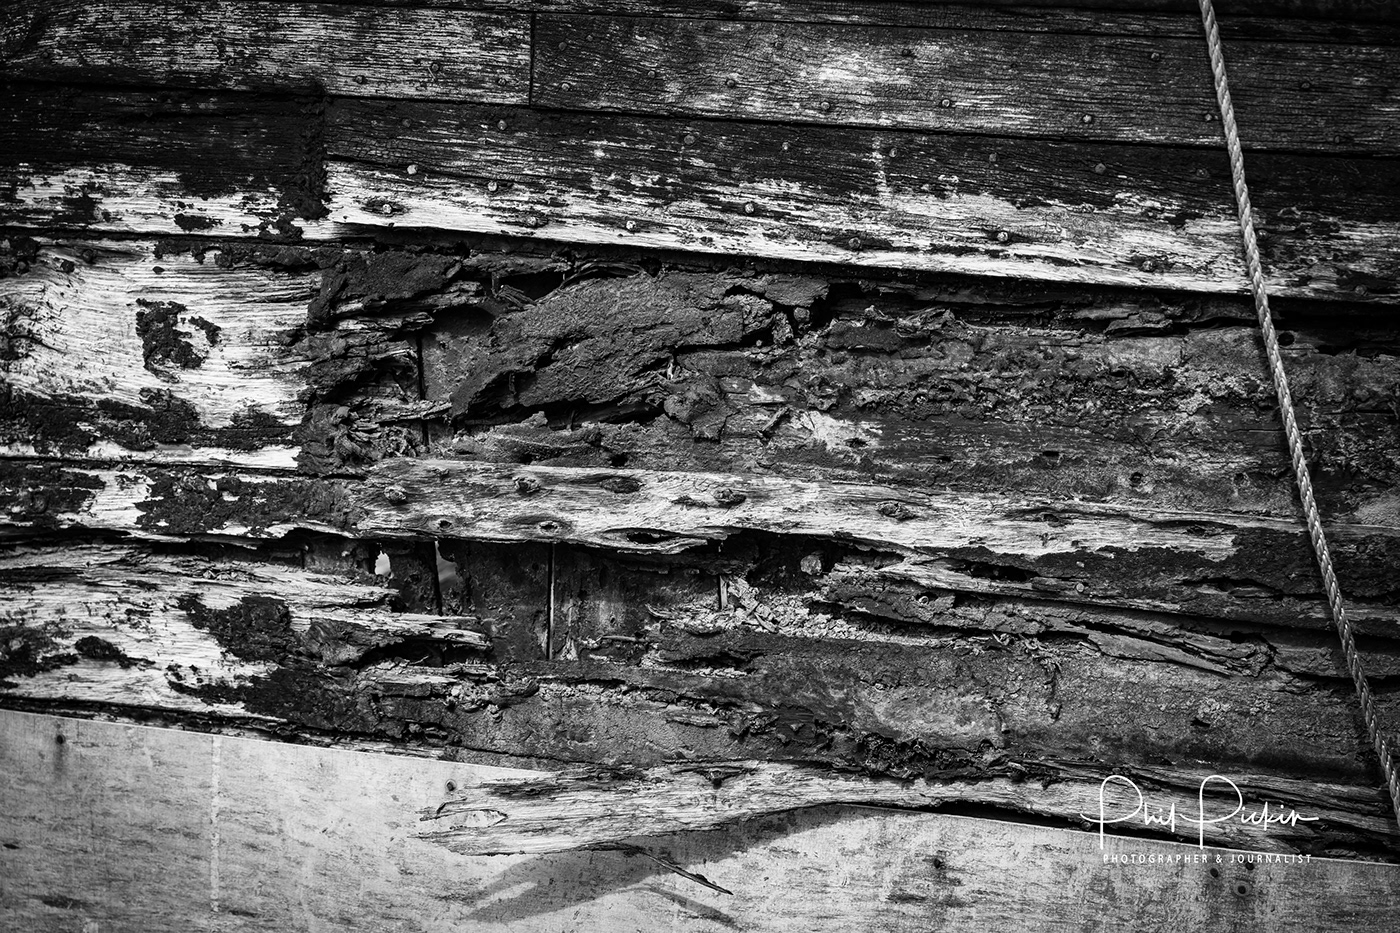 Boats old boats decaying boats black and white photojournalism  texture history heritage Archive historic